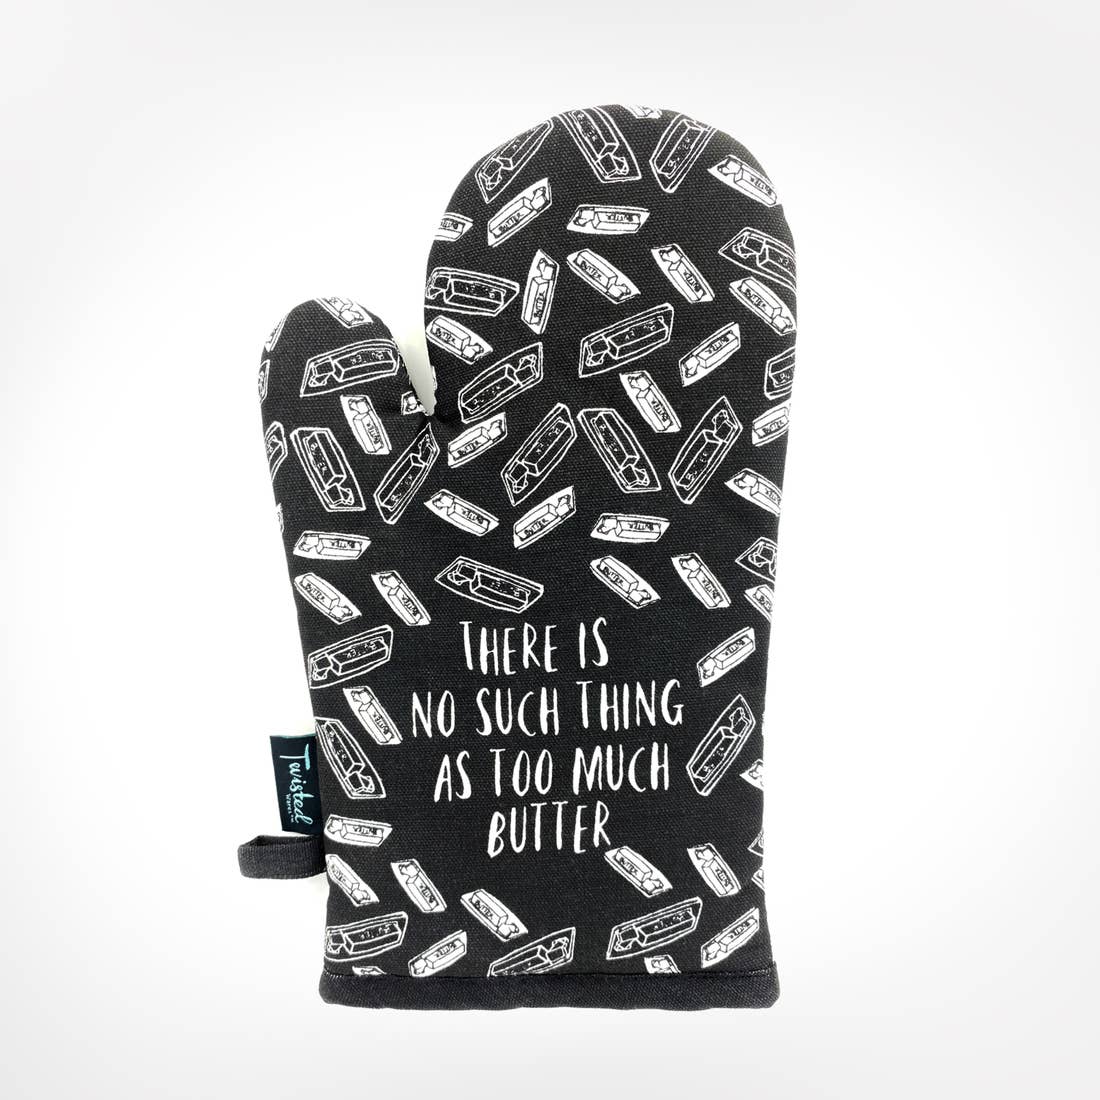 There Is No Such Thing As Too Much Butter Oven Mitt